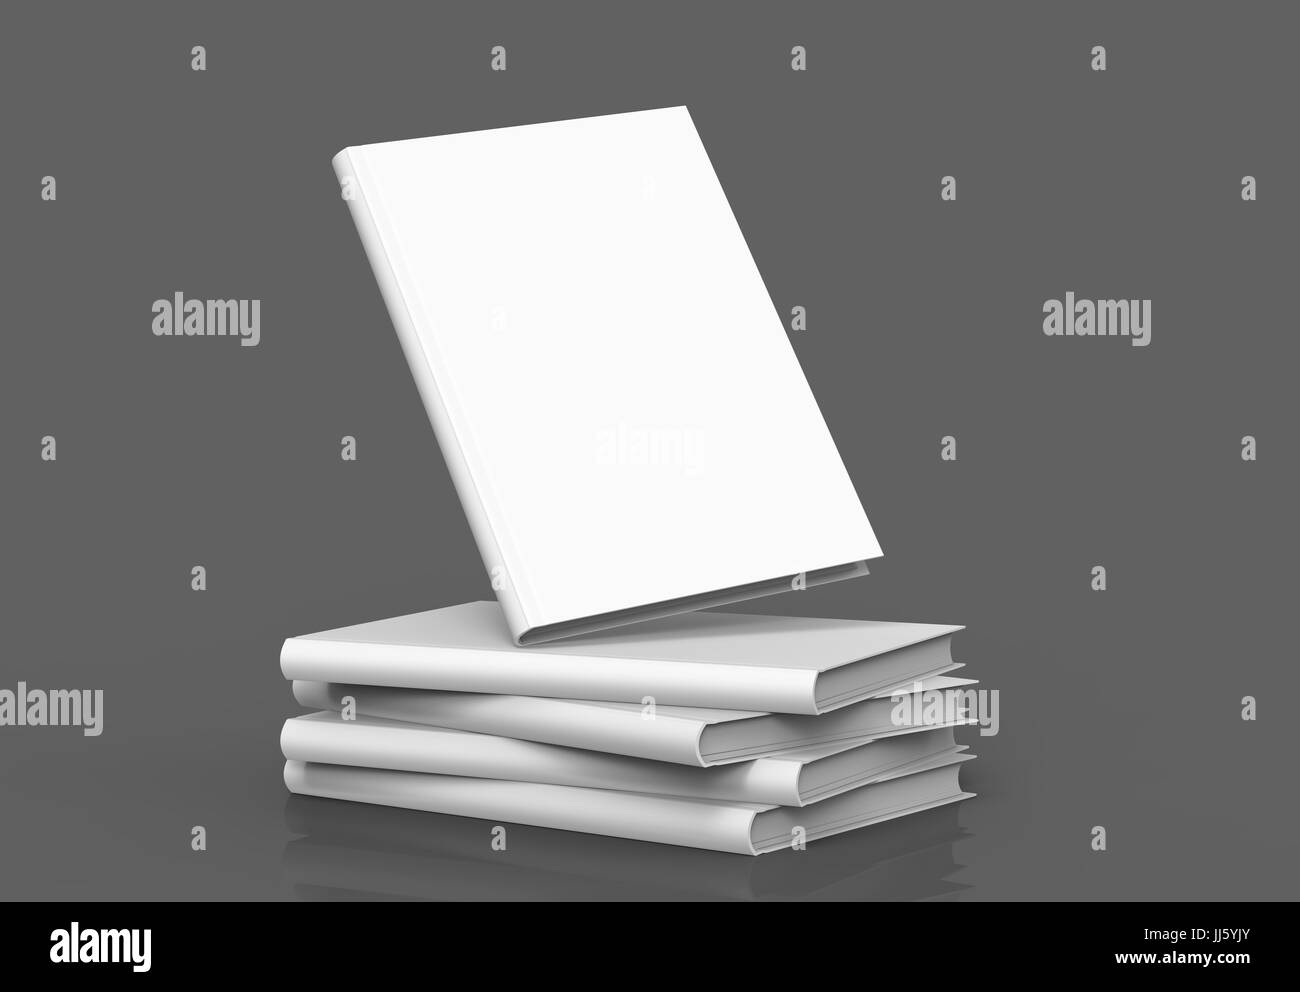 Hardcover book template, blank standing books mockup for design uses, 3d  rendering Stock Photo - Alamy